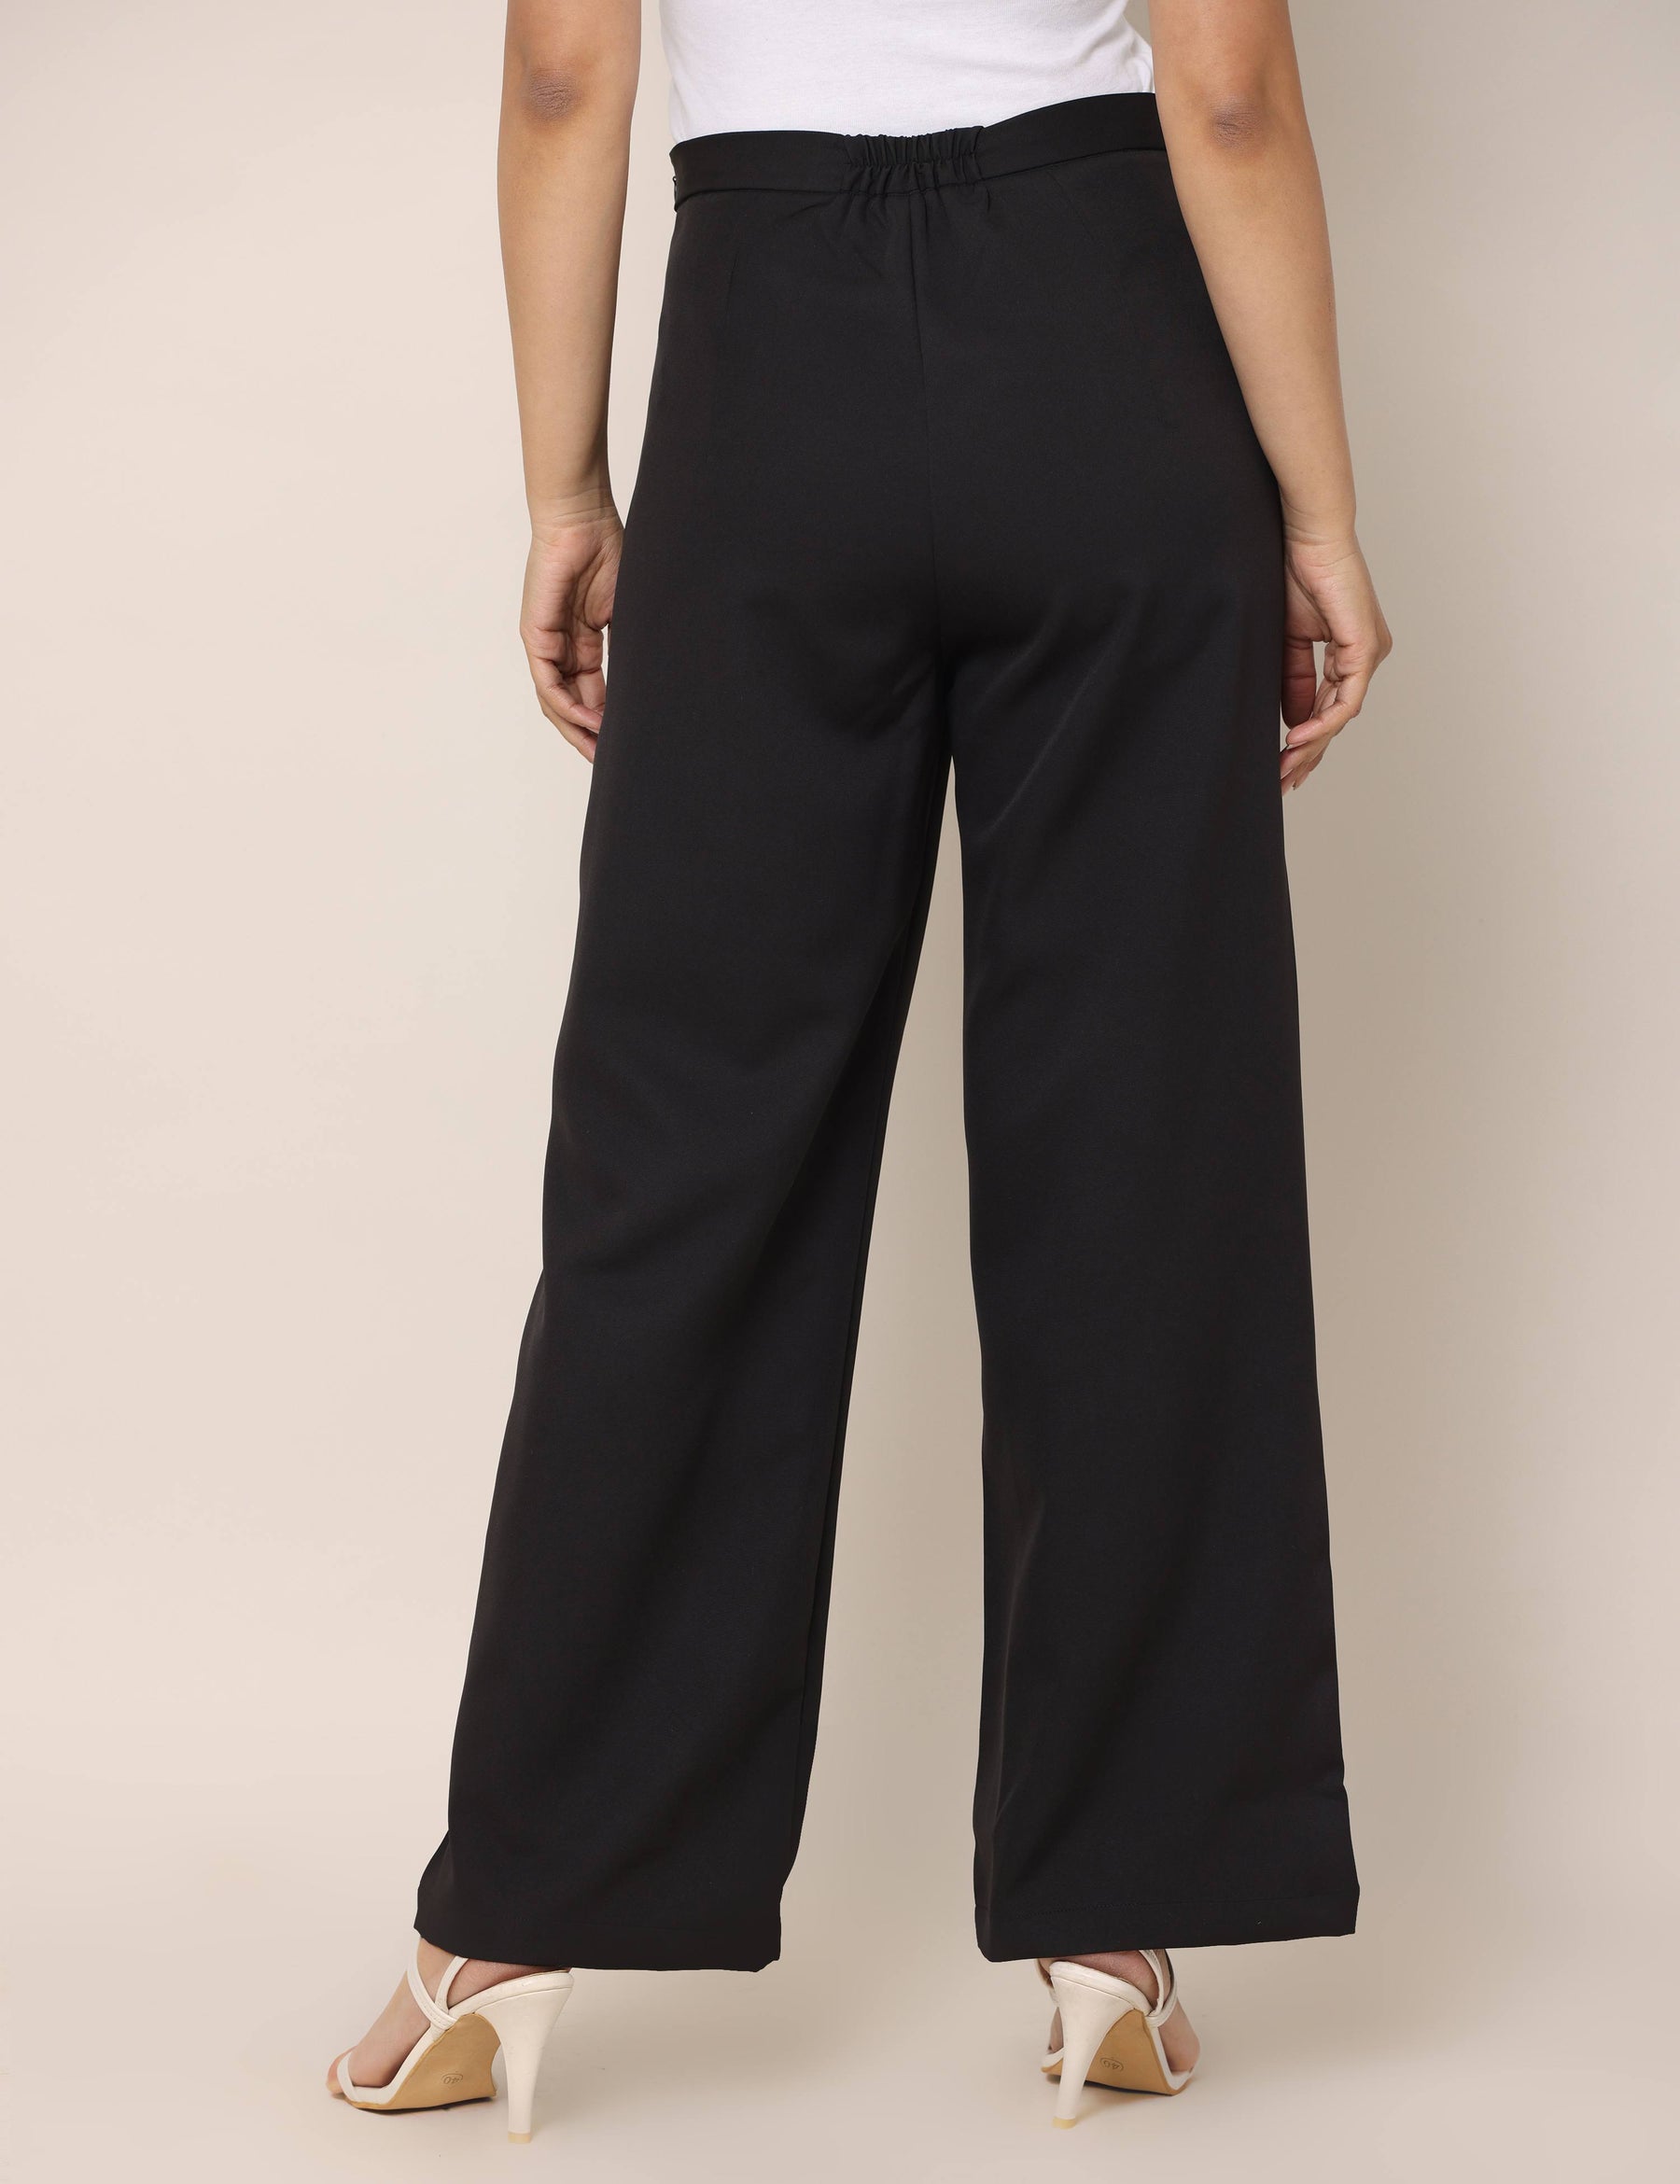 ASOS DESIGN Tall high waisted stretch trousers in black  ASOS